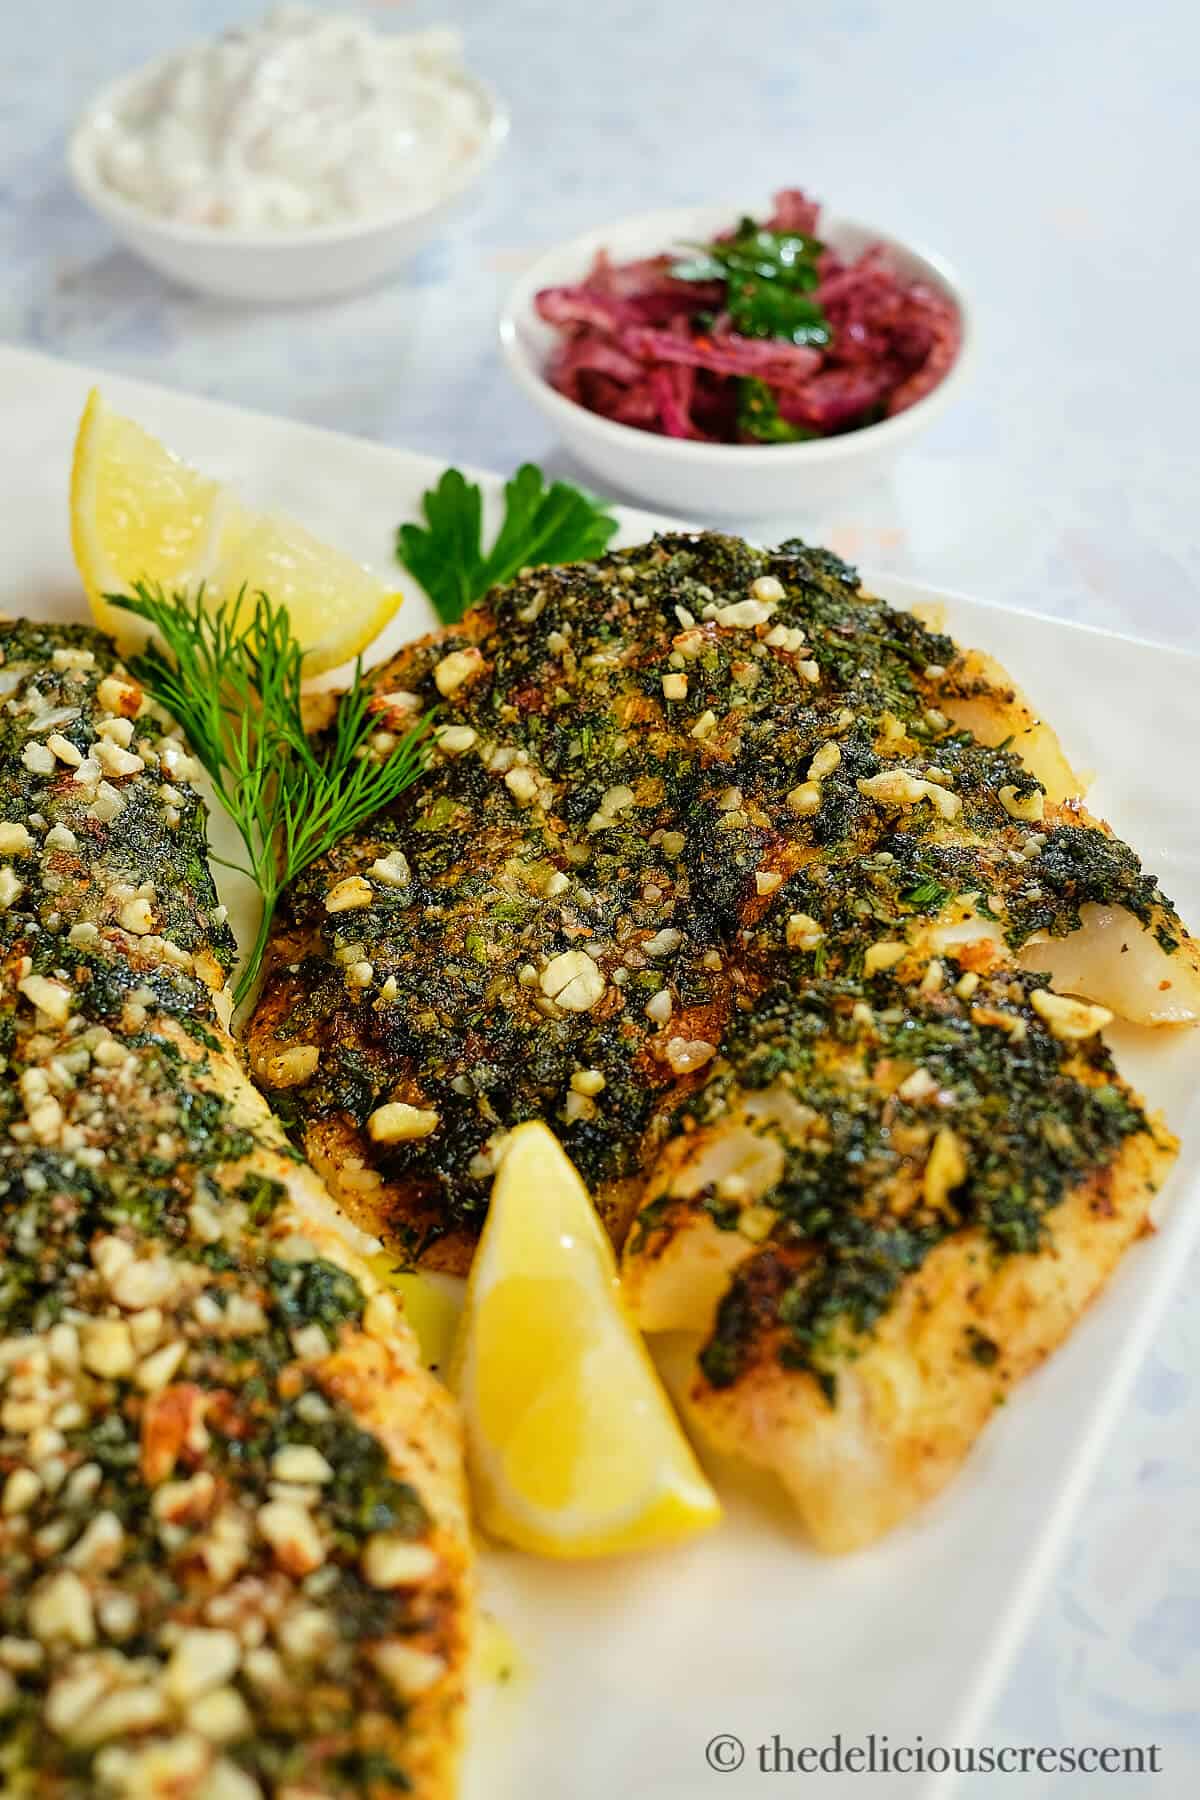 Herb crusted haddock baked and served on the table.